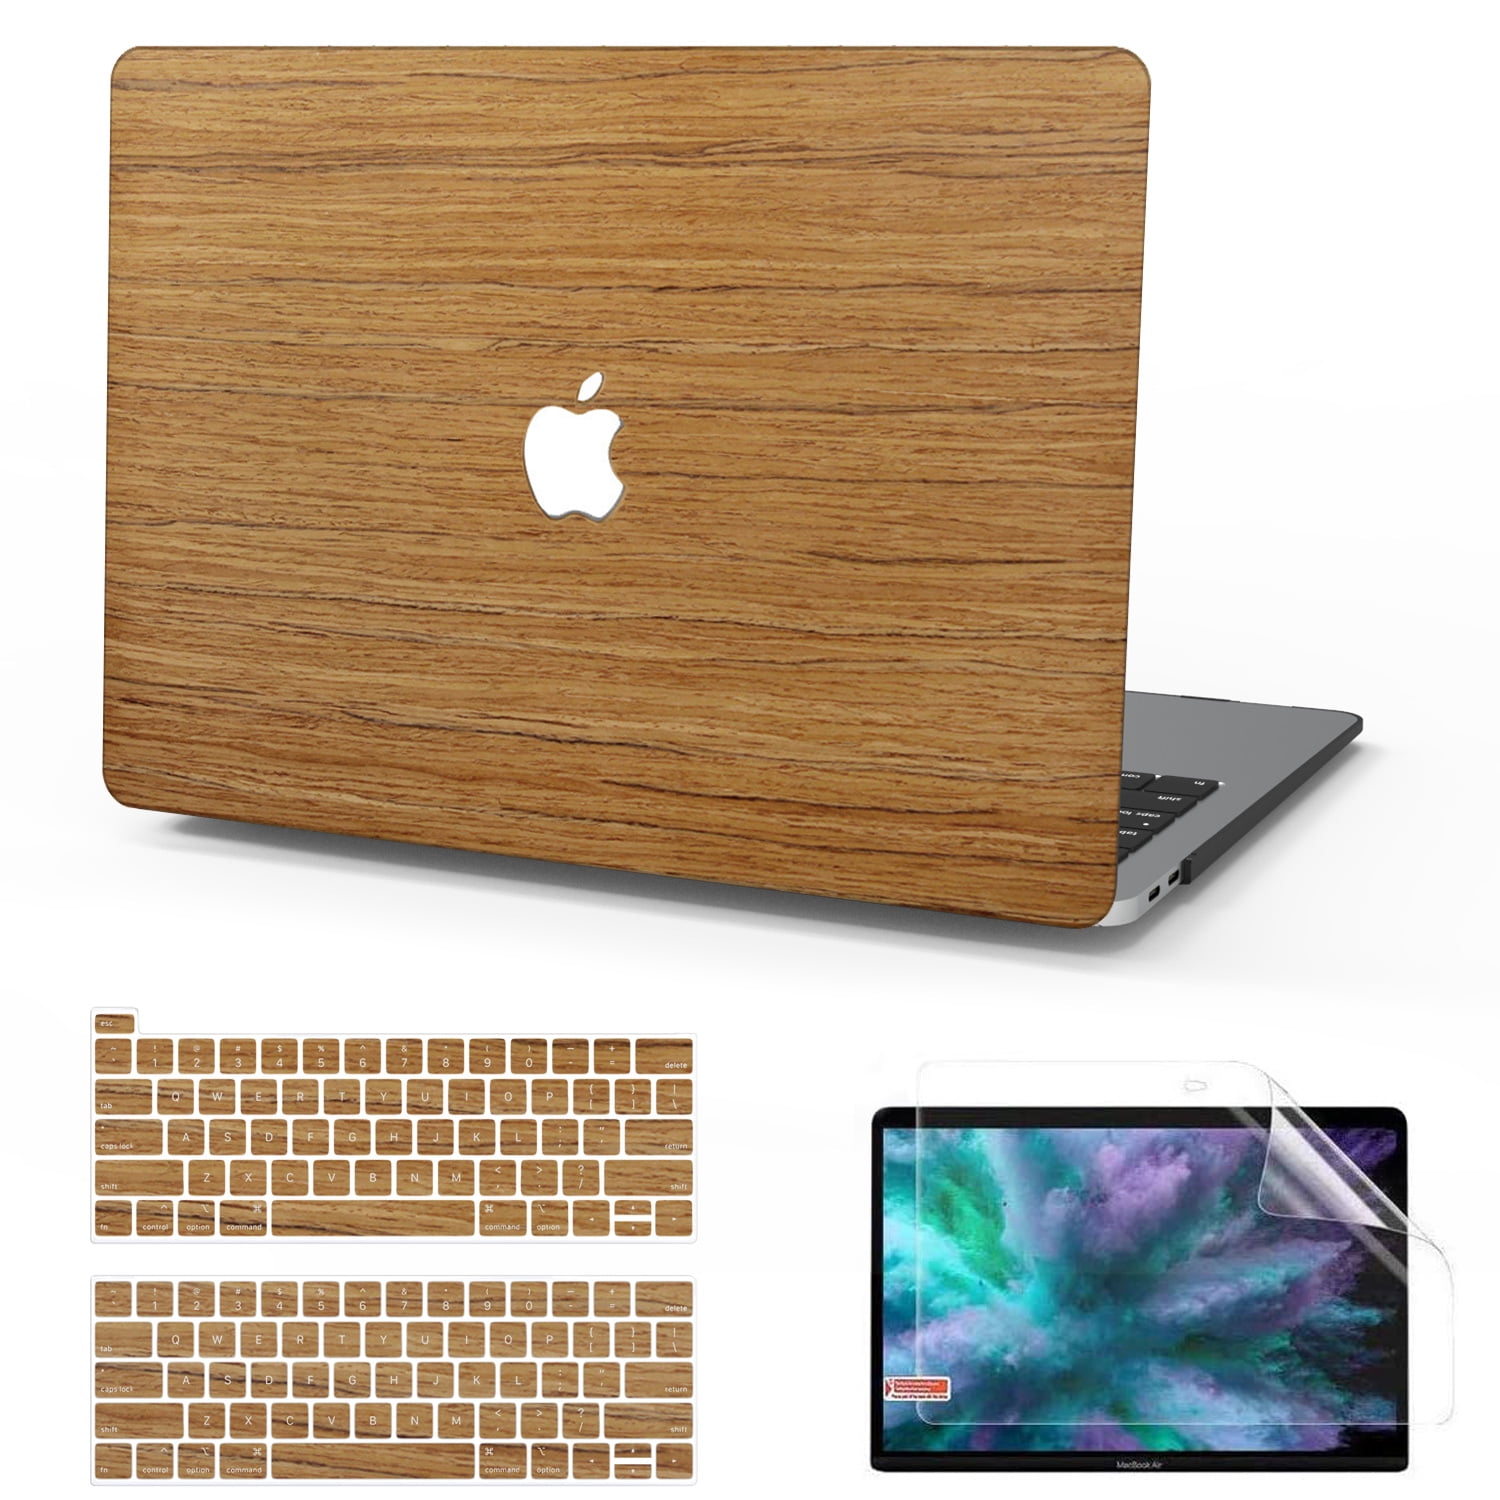 MacBook Air 13 Inch Case Brown Retro Background Film Strips MacBook Air11 Case MacBook Pro13 Pro15 Plastic Case Keyboard Cover,Screen Protector,Keyboard Cleaning Brush